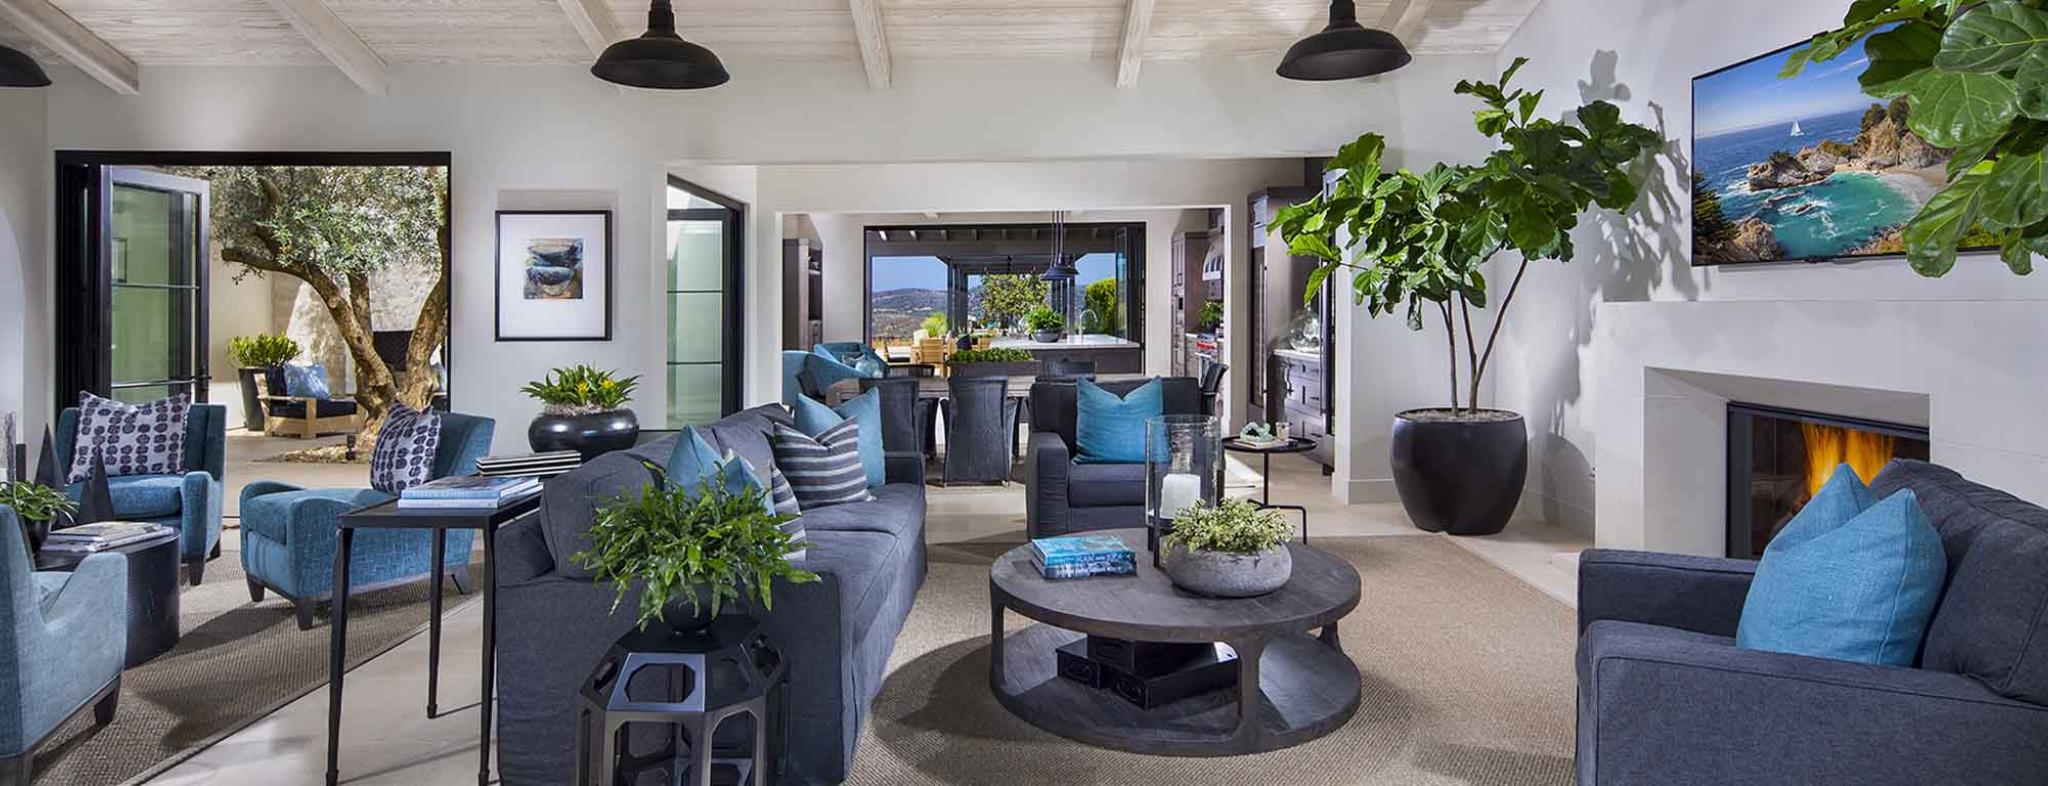 The New Home Company Announces First-of-its-Kind Design Collaboration with RH, Restoration Hardware for Luxury Residences at Crystal Cove